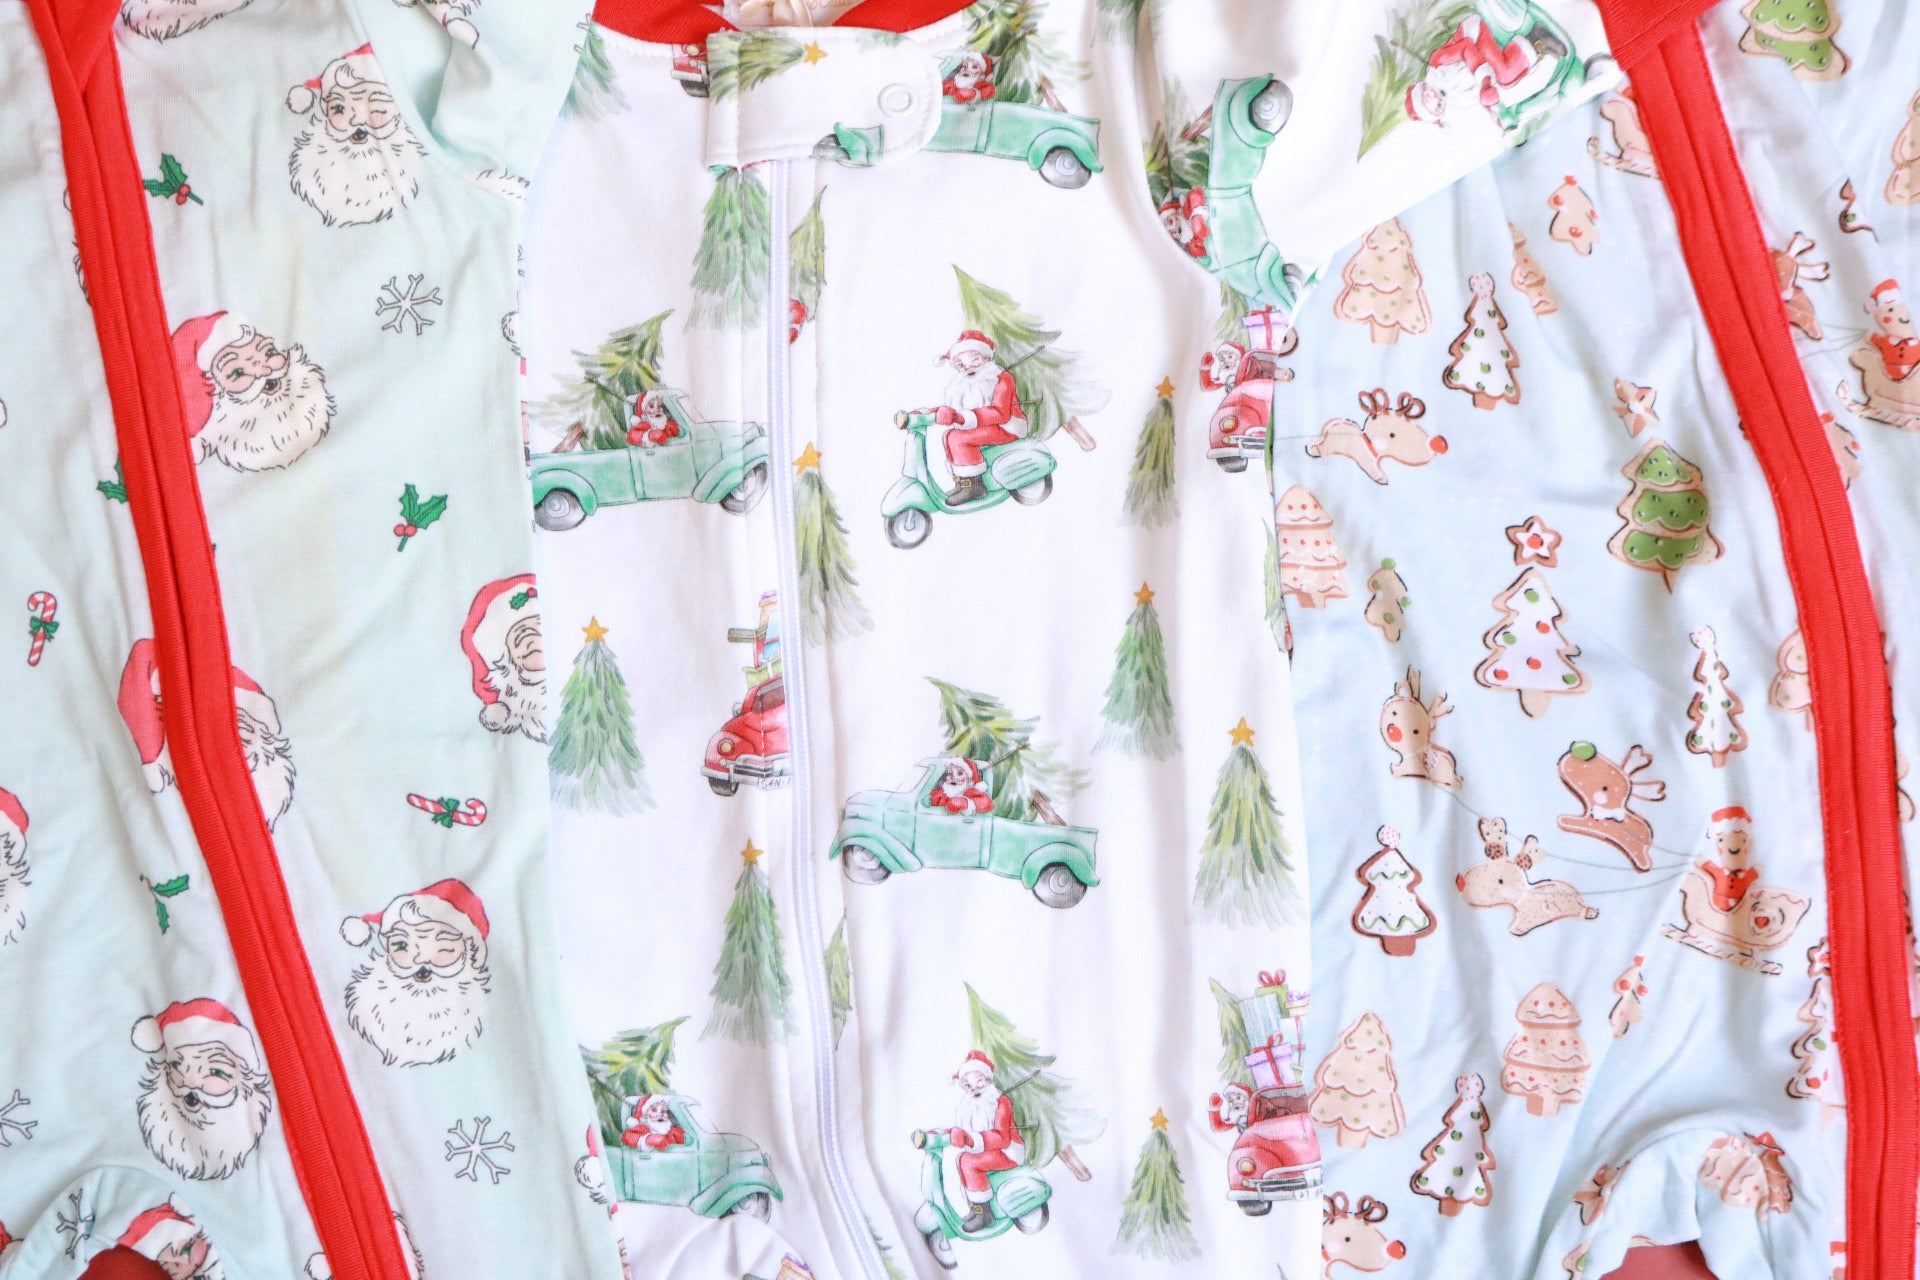 75% off Cozy Holiday Jammies